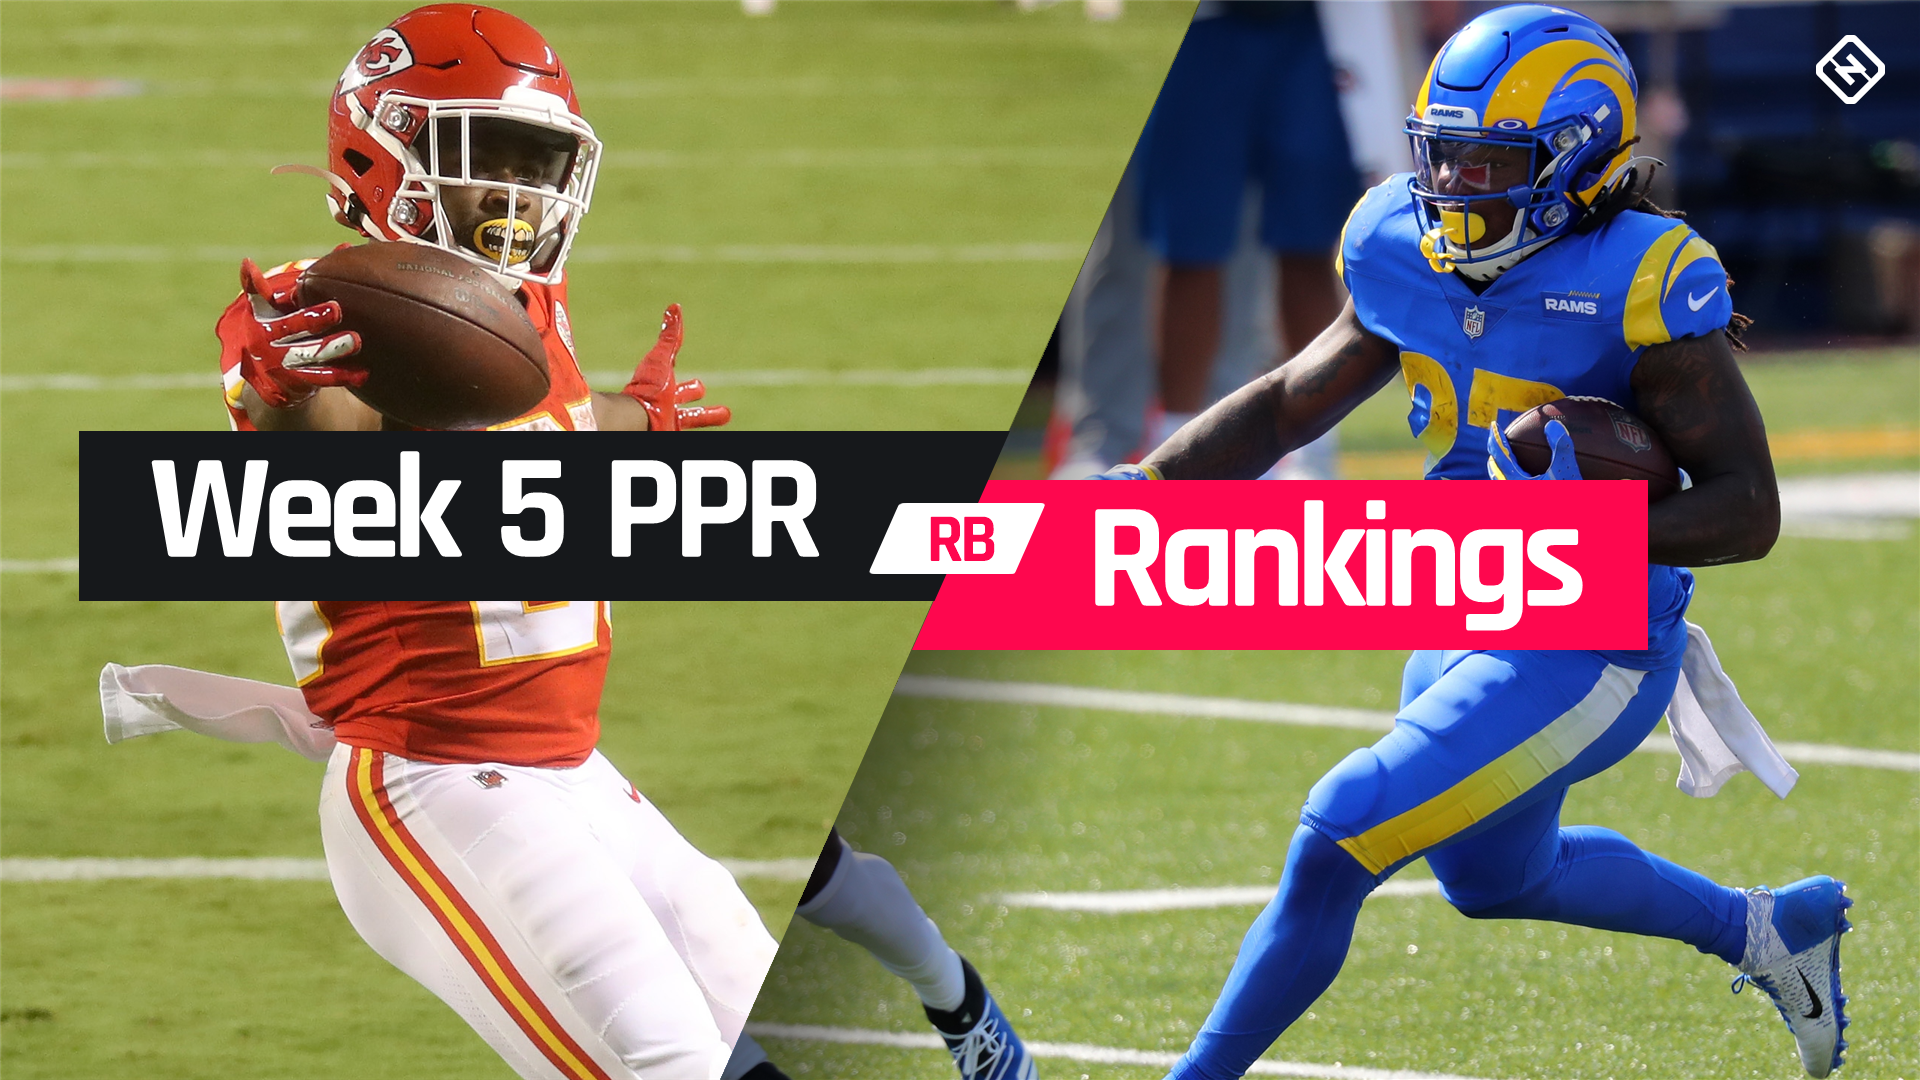 Week 5 Fantasy RB PPR Rankings: Must-starts, sleepers, potential busts